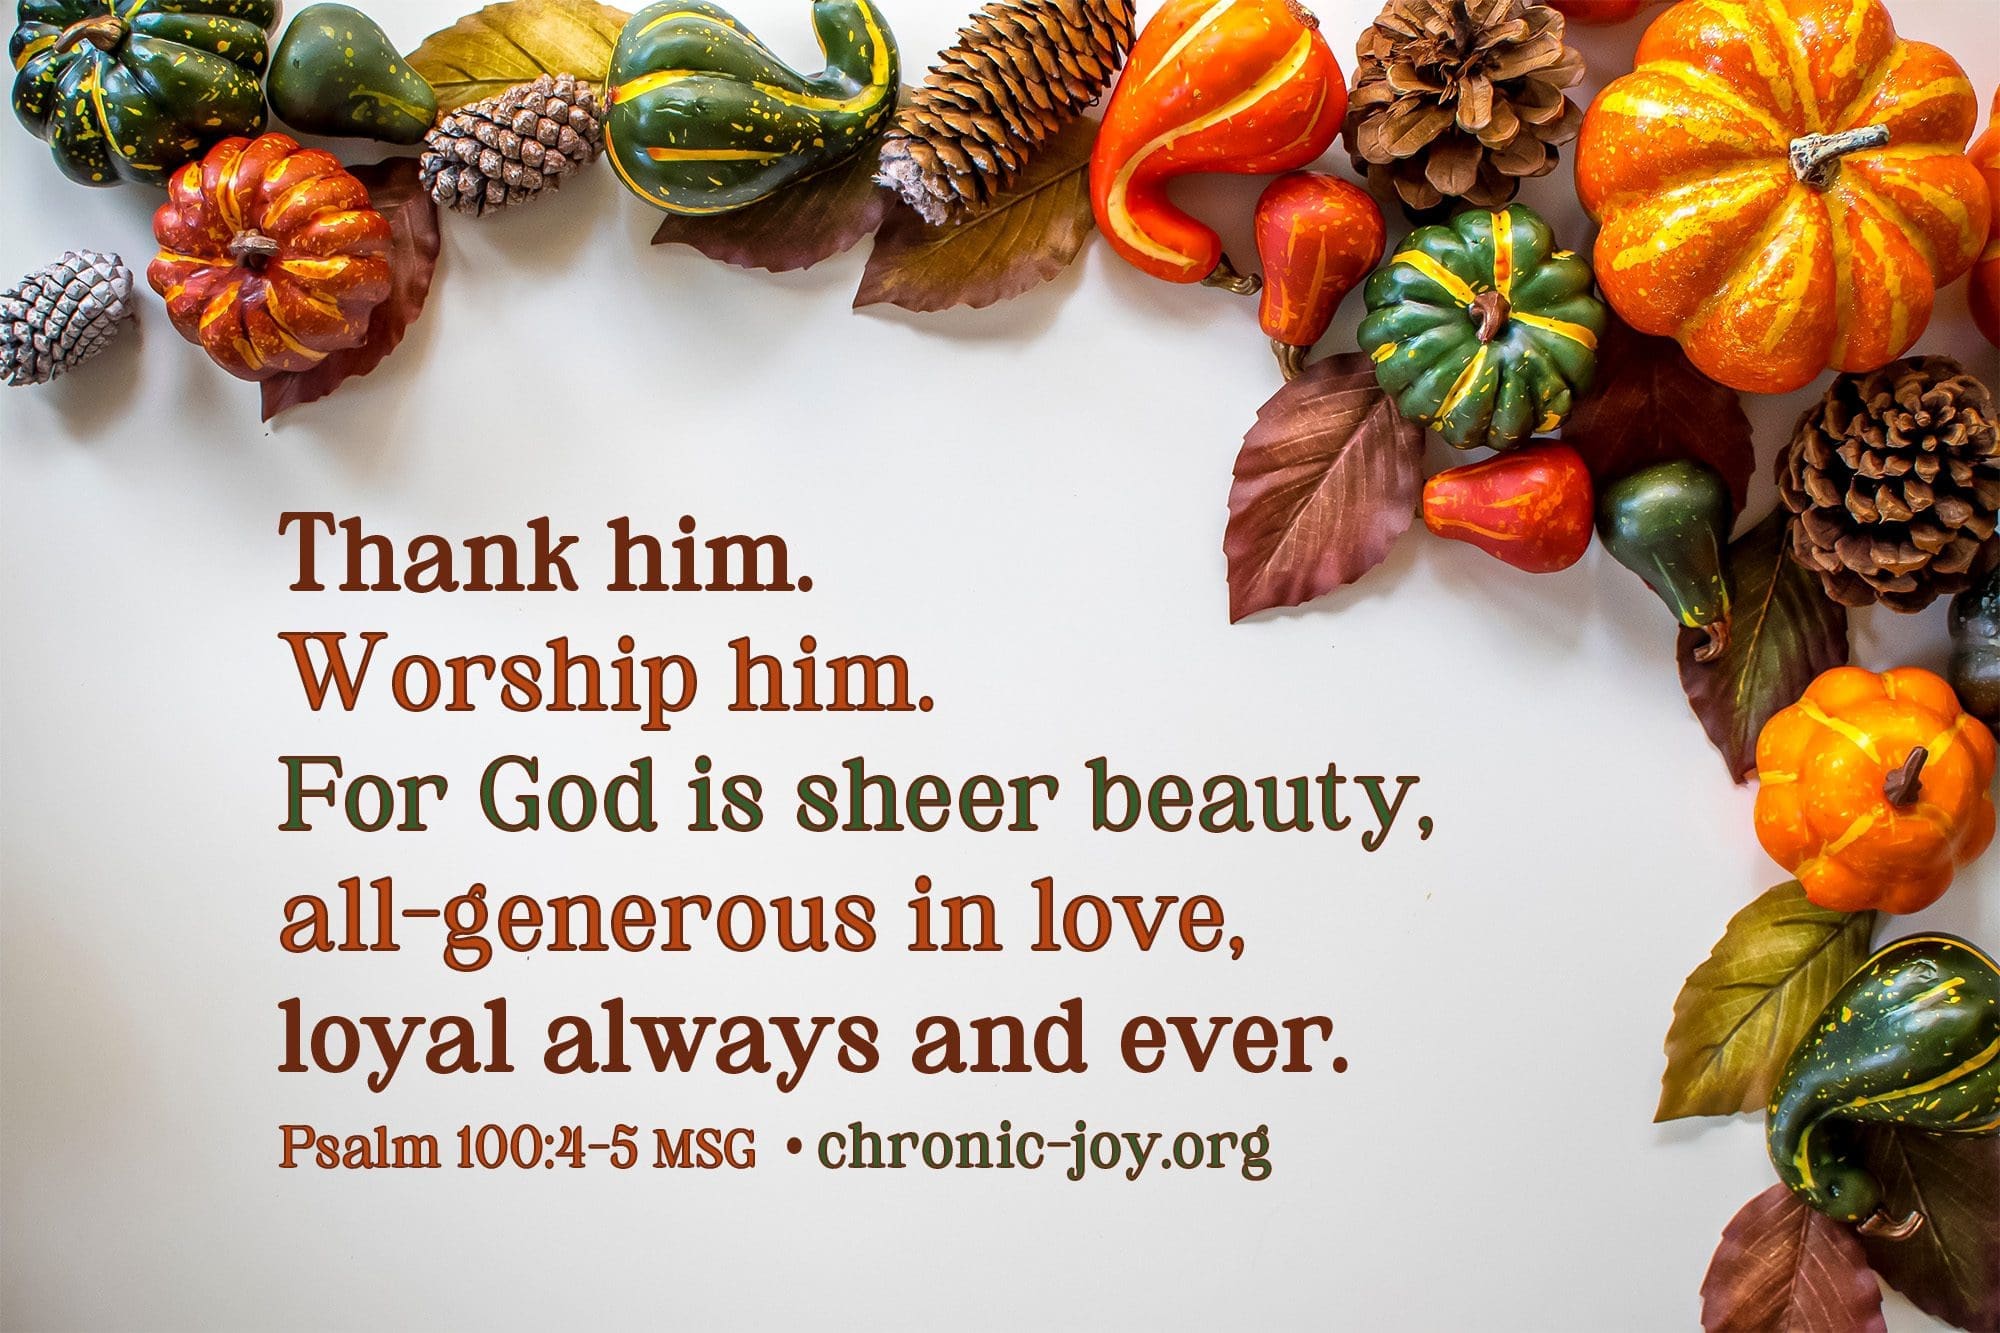 "Thank him. Worship him. For God is sheer beauty, all-generous in love, loyal always and ever." Psalm 100:4-5 MSG